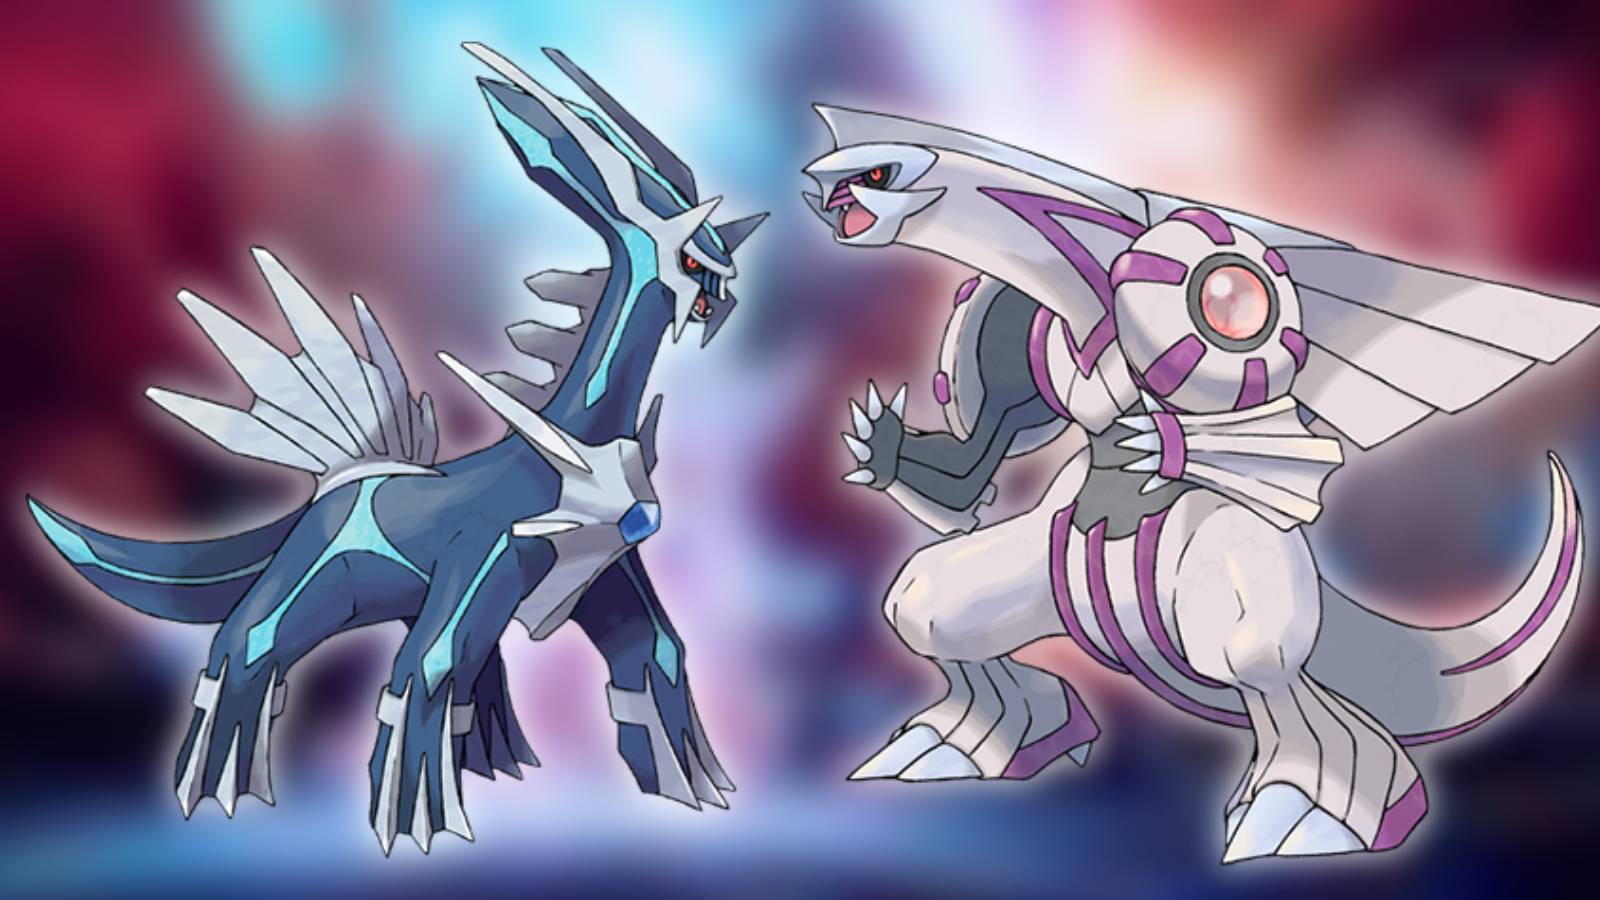 The Pokemon Dialga and Palkia are pictured against a blurred background